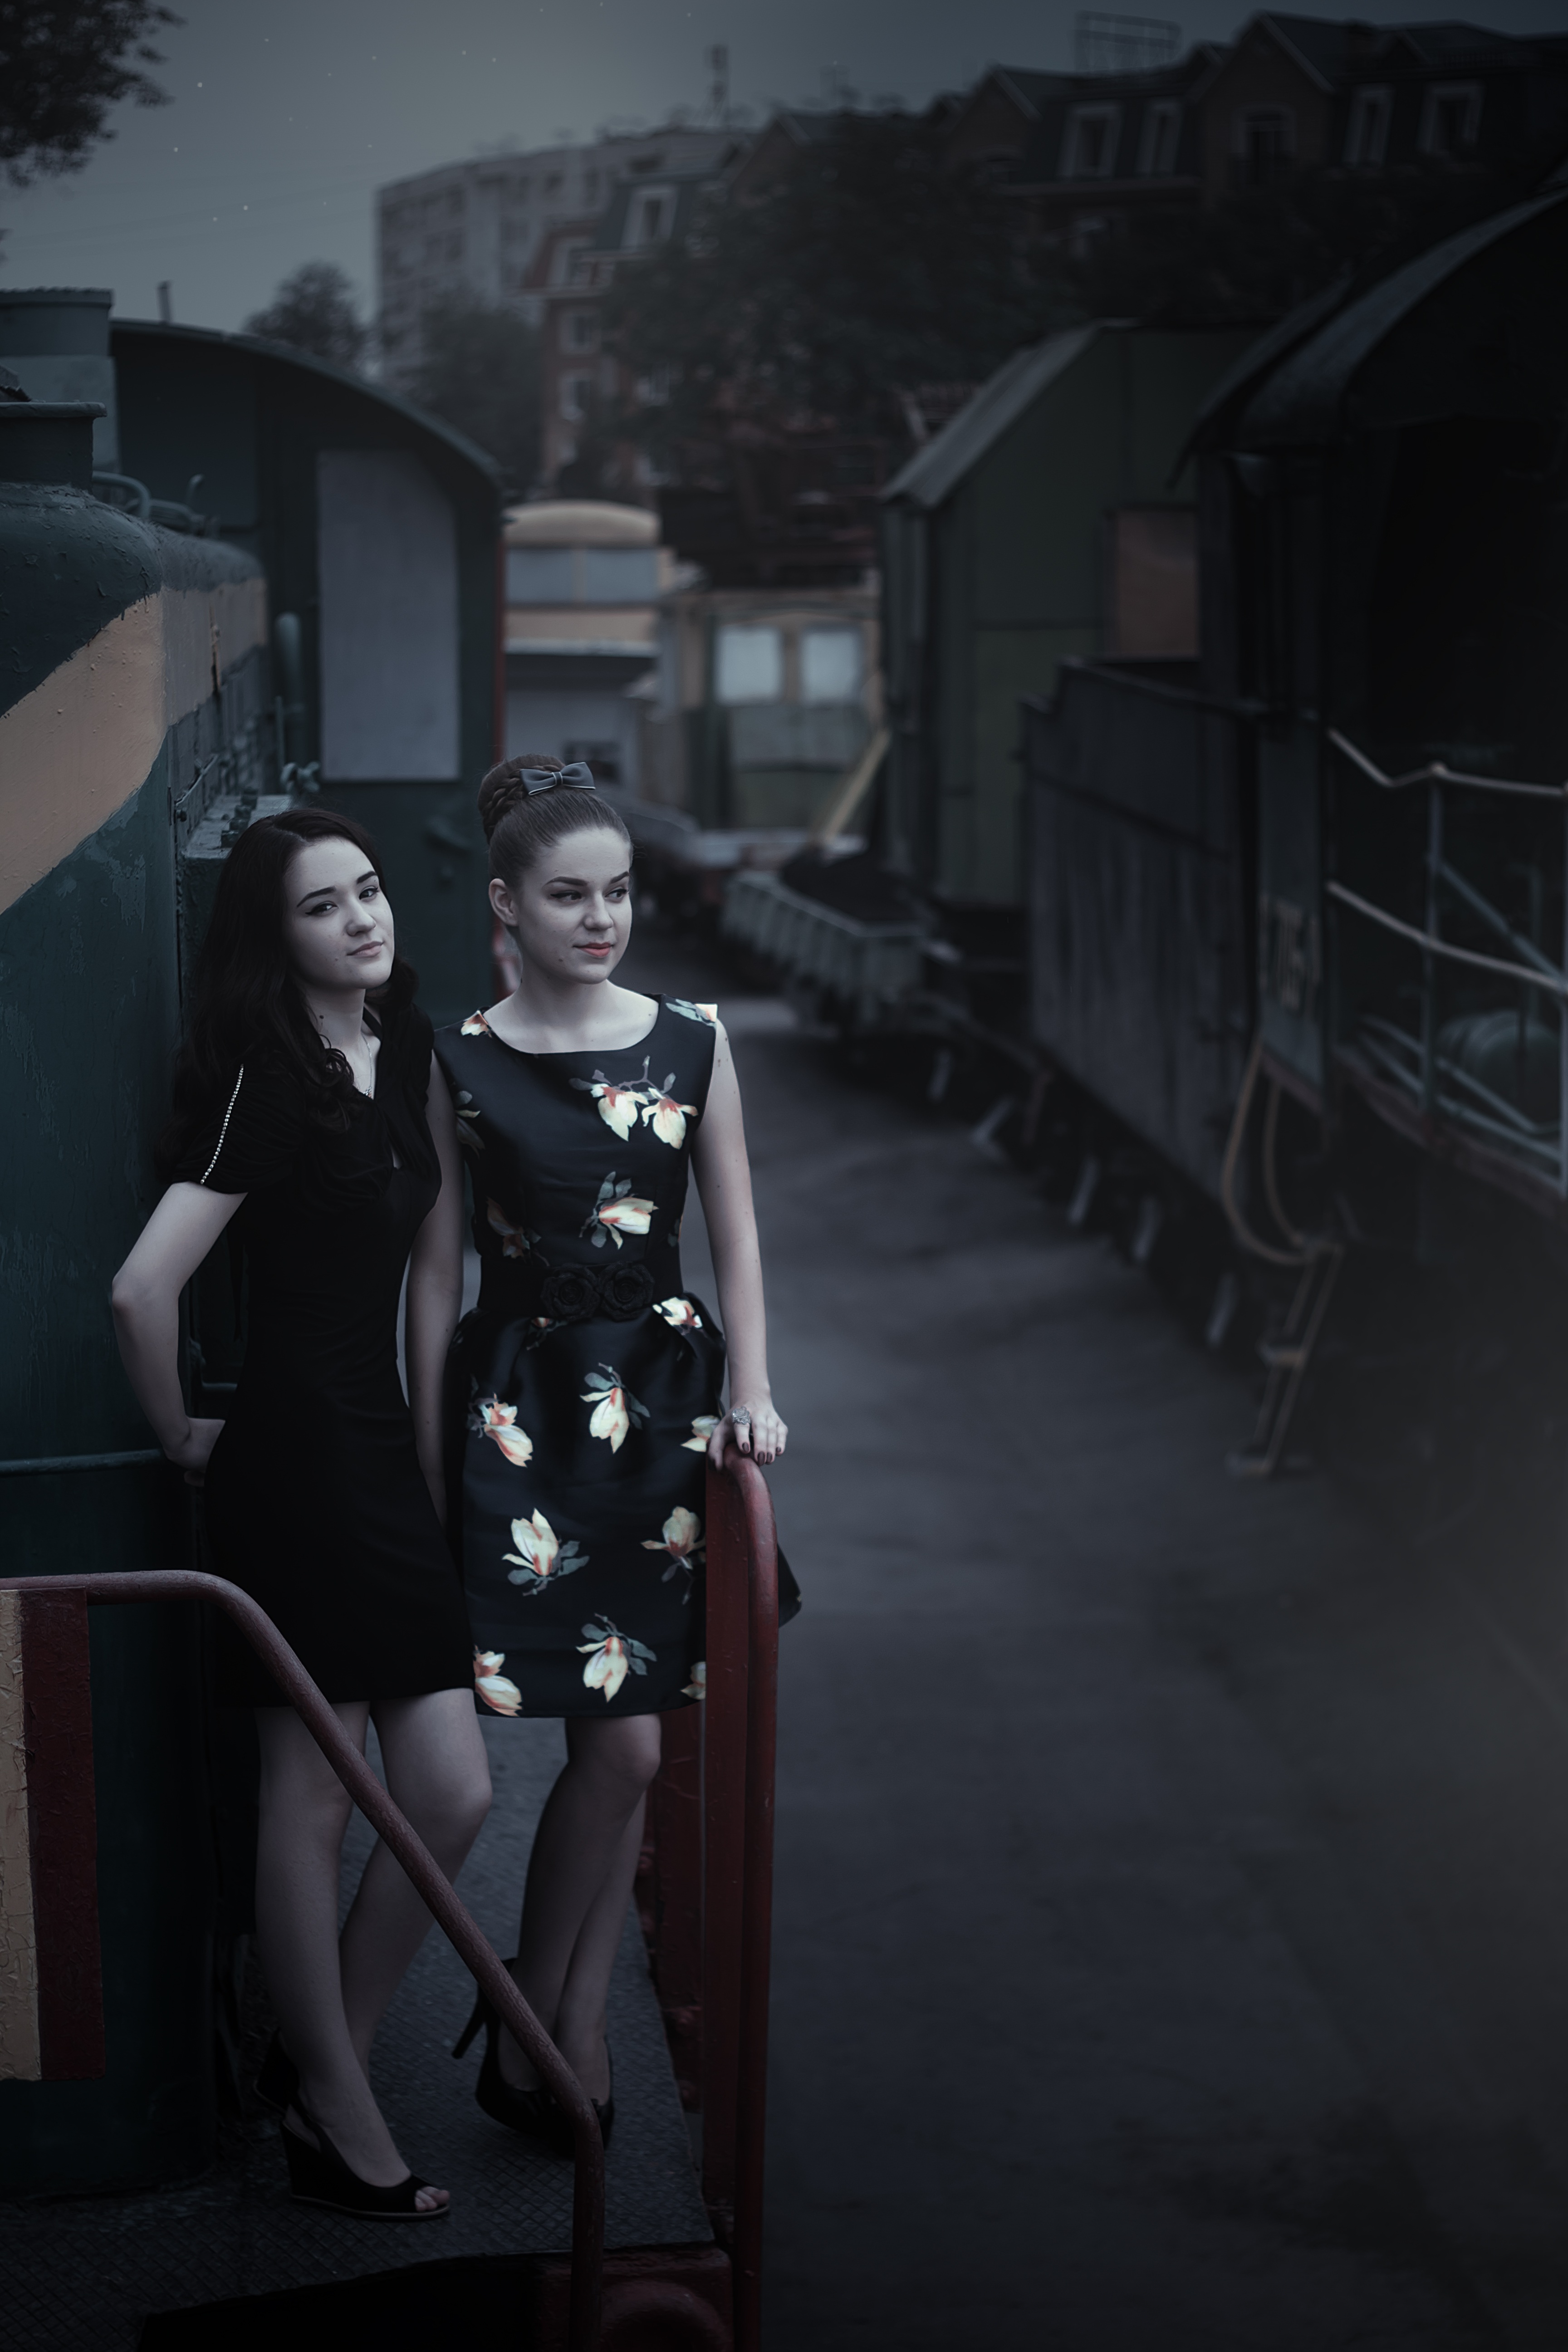 Girls at the station photo